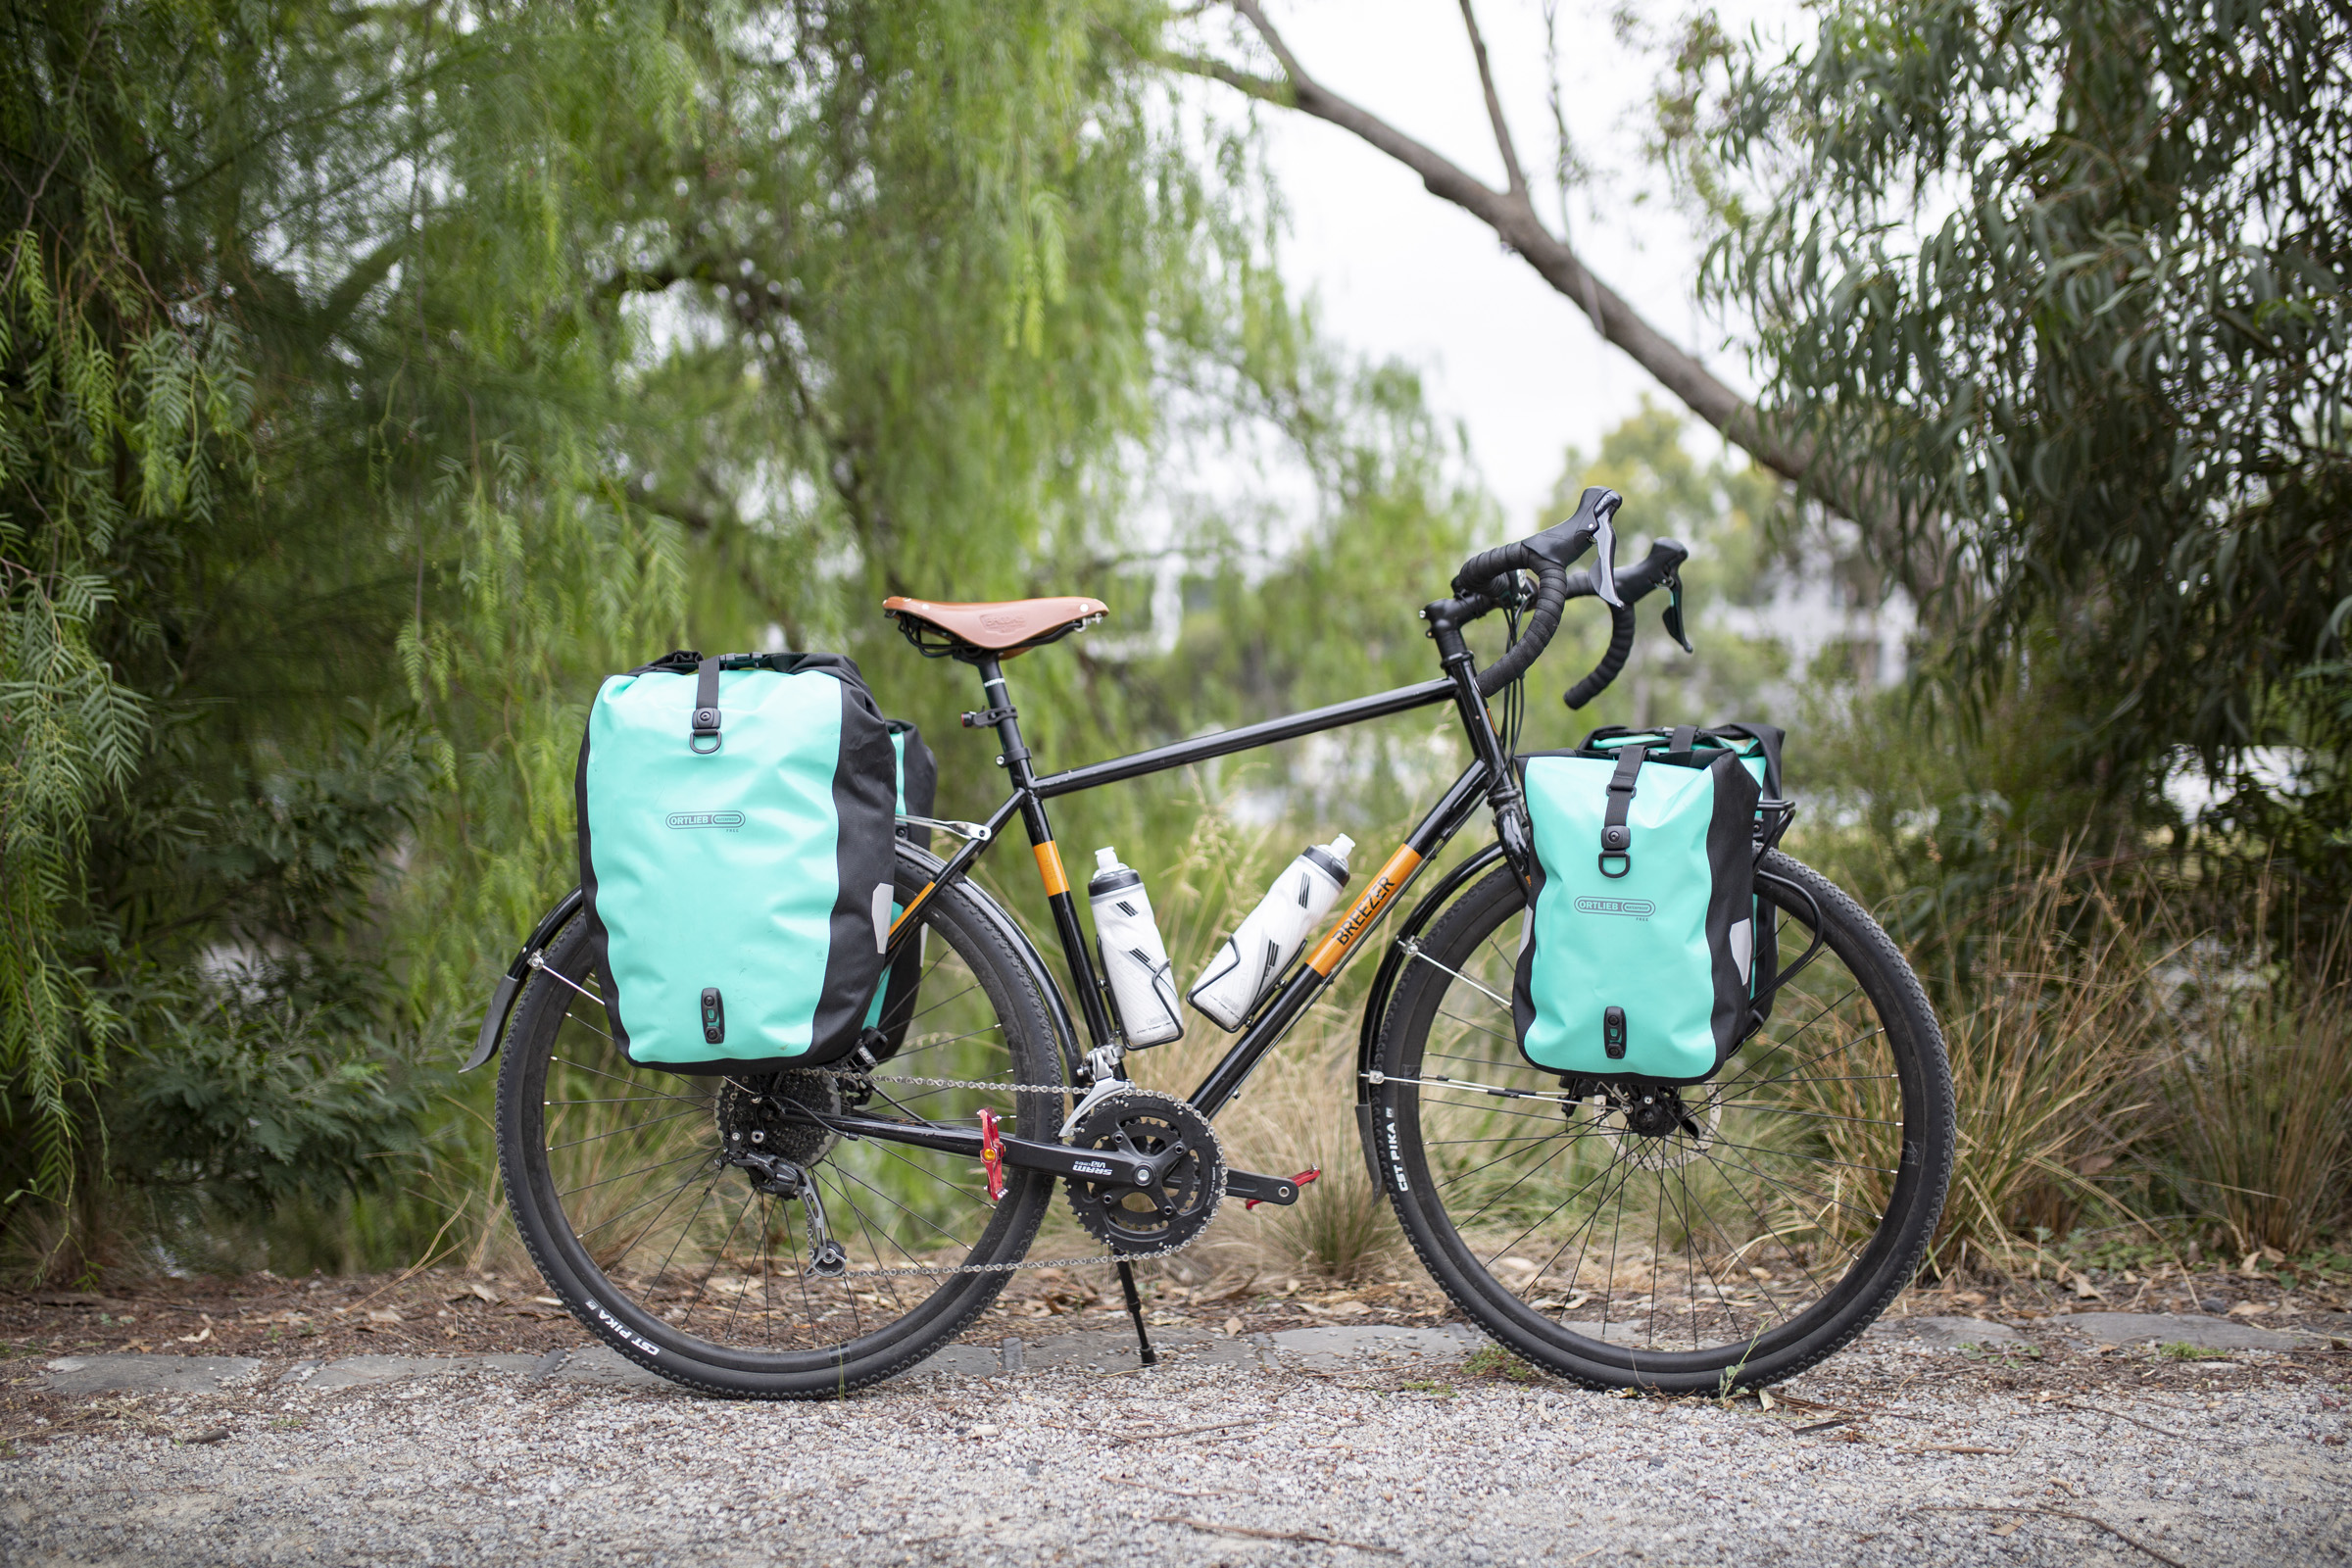 Ortlieb Pannier Review